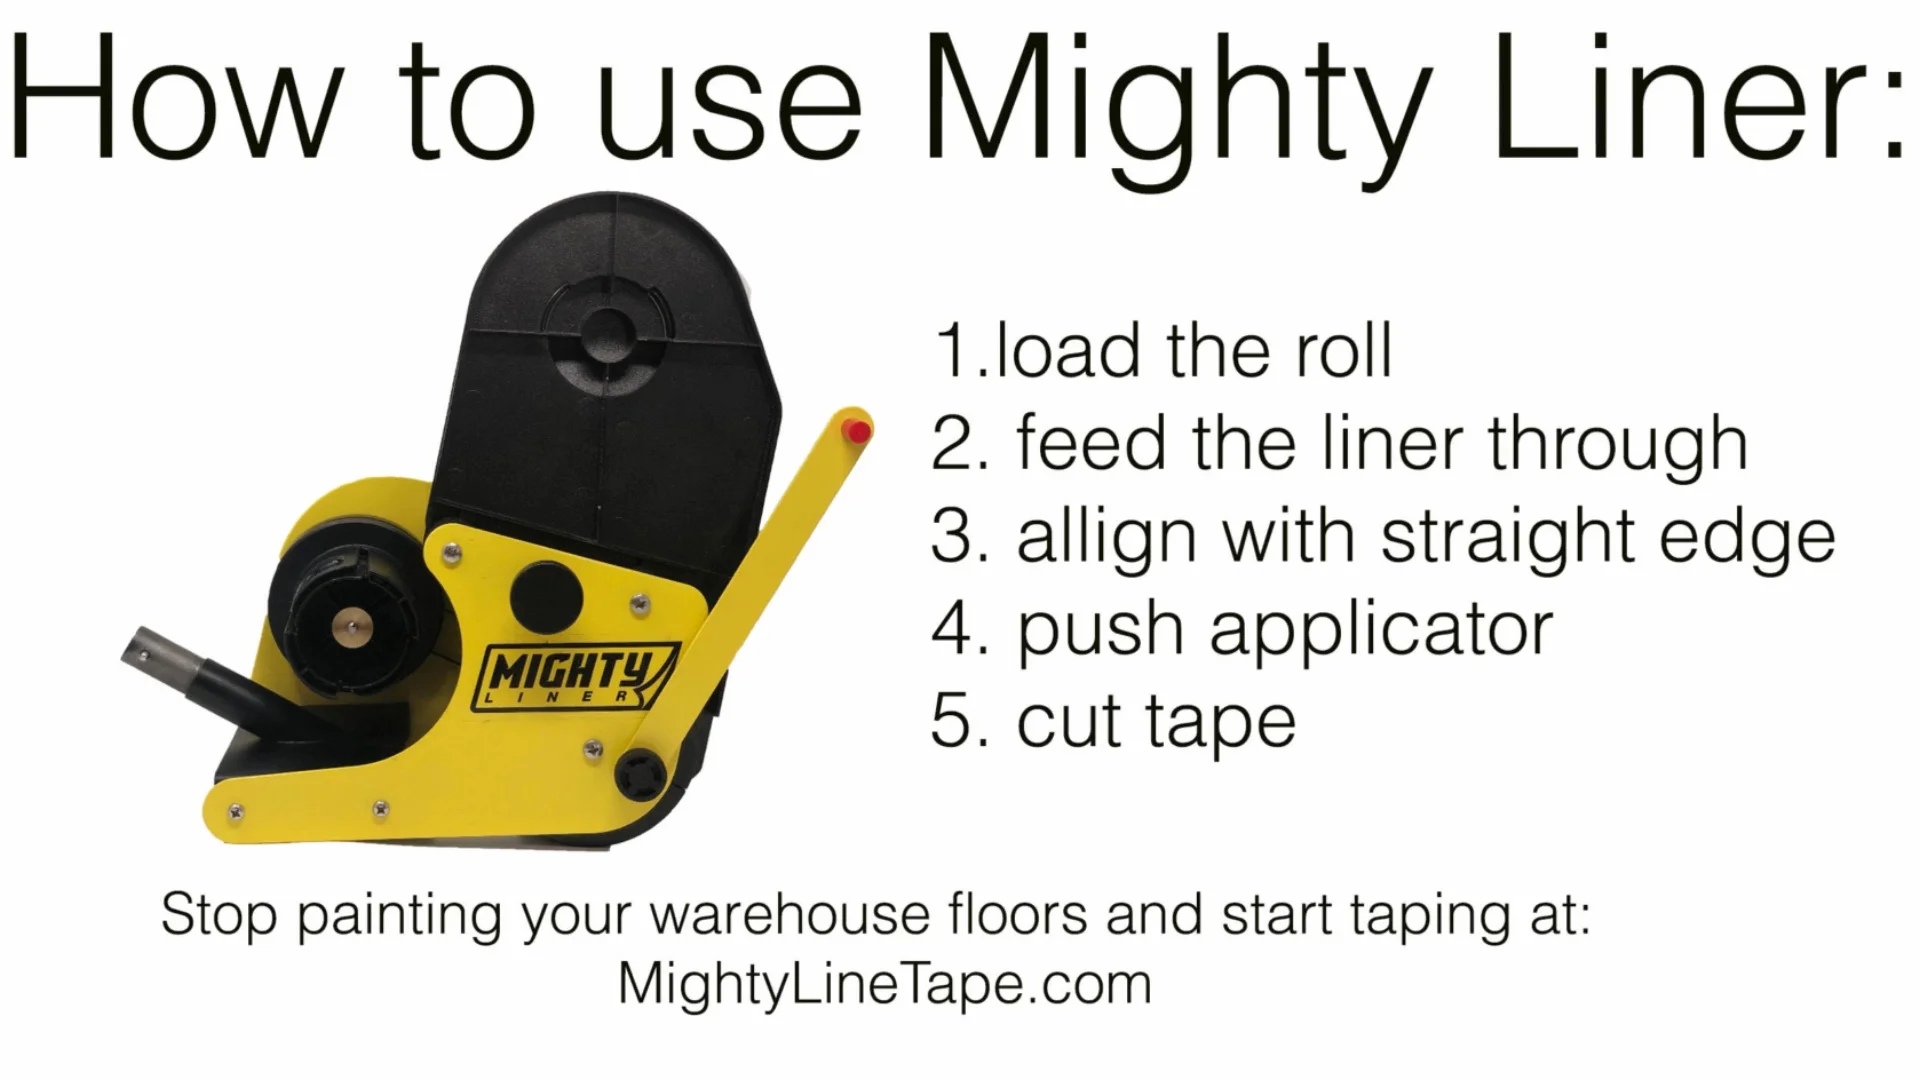 How To Use The Mighty Liner Floor Tape Applicator Tutorial On Vimeo